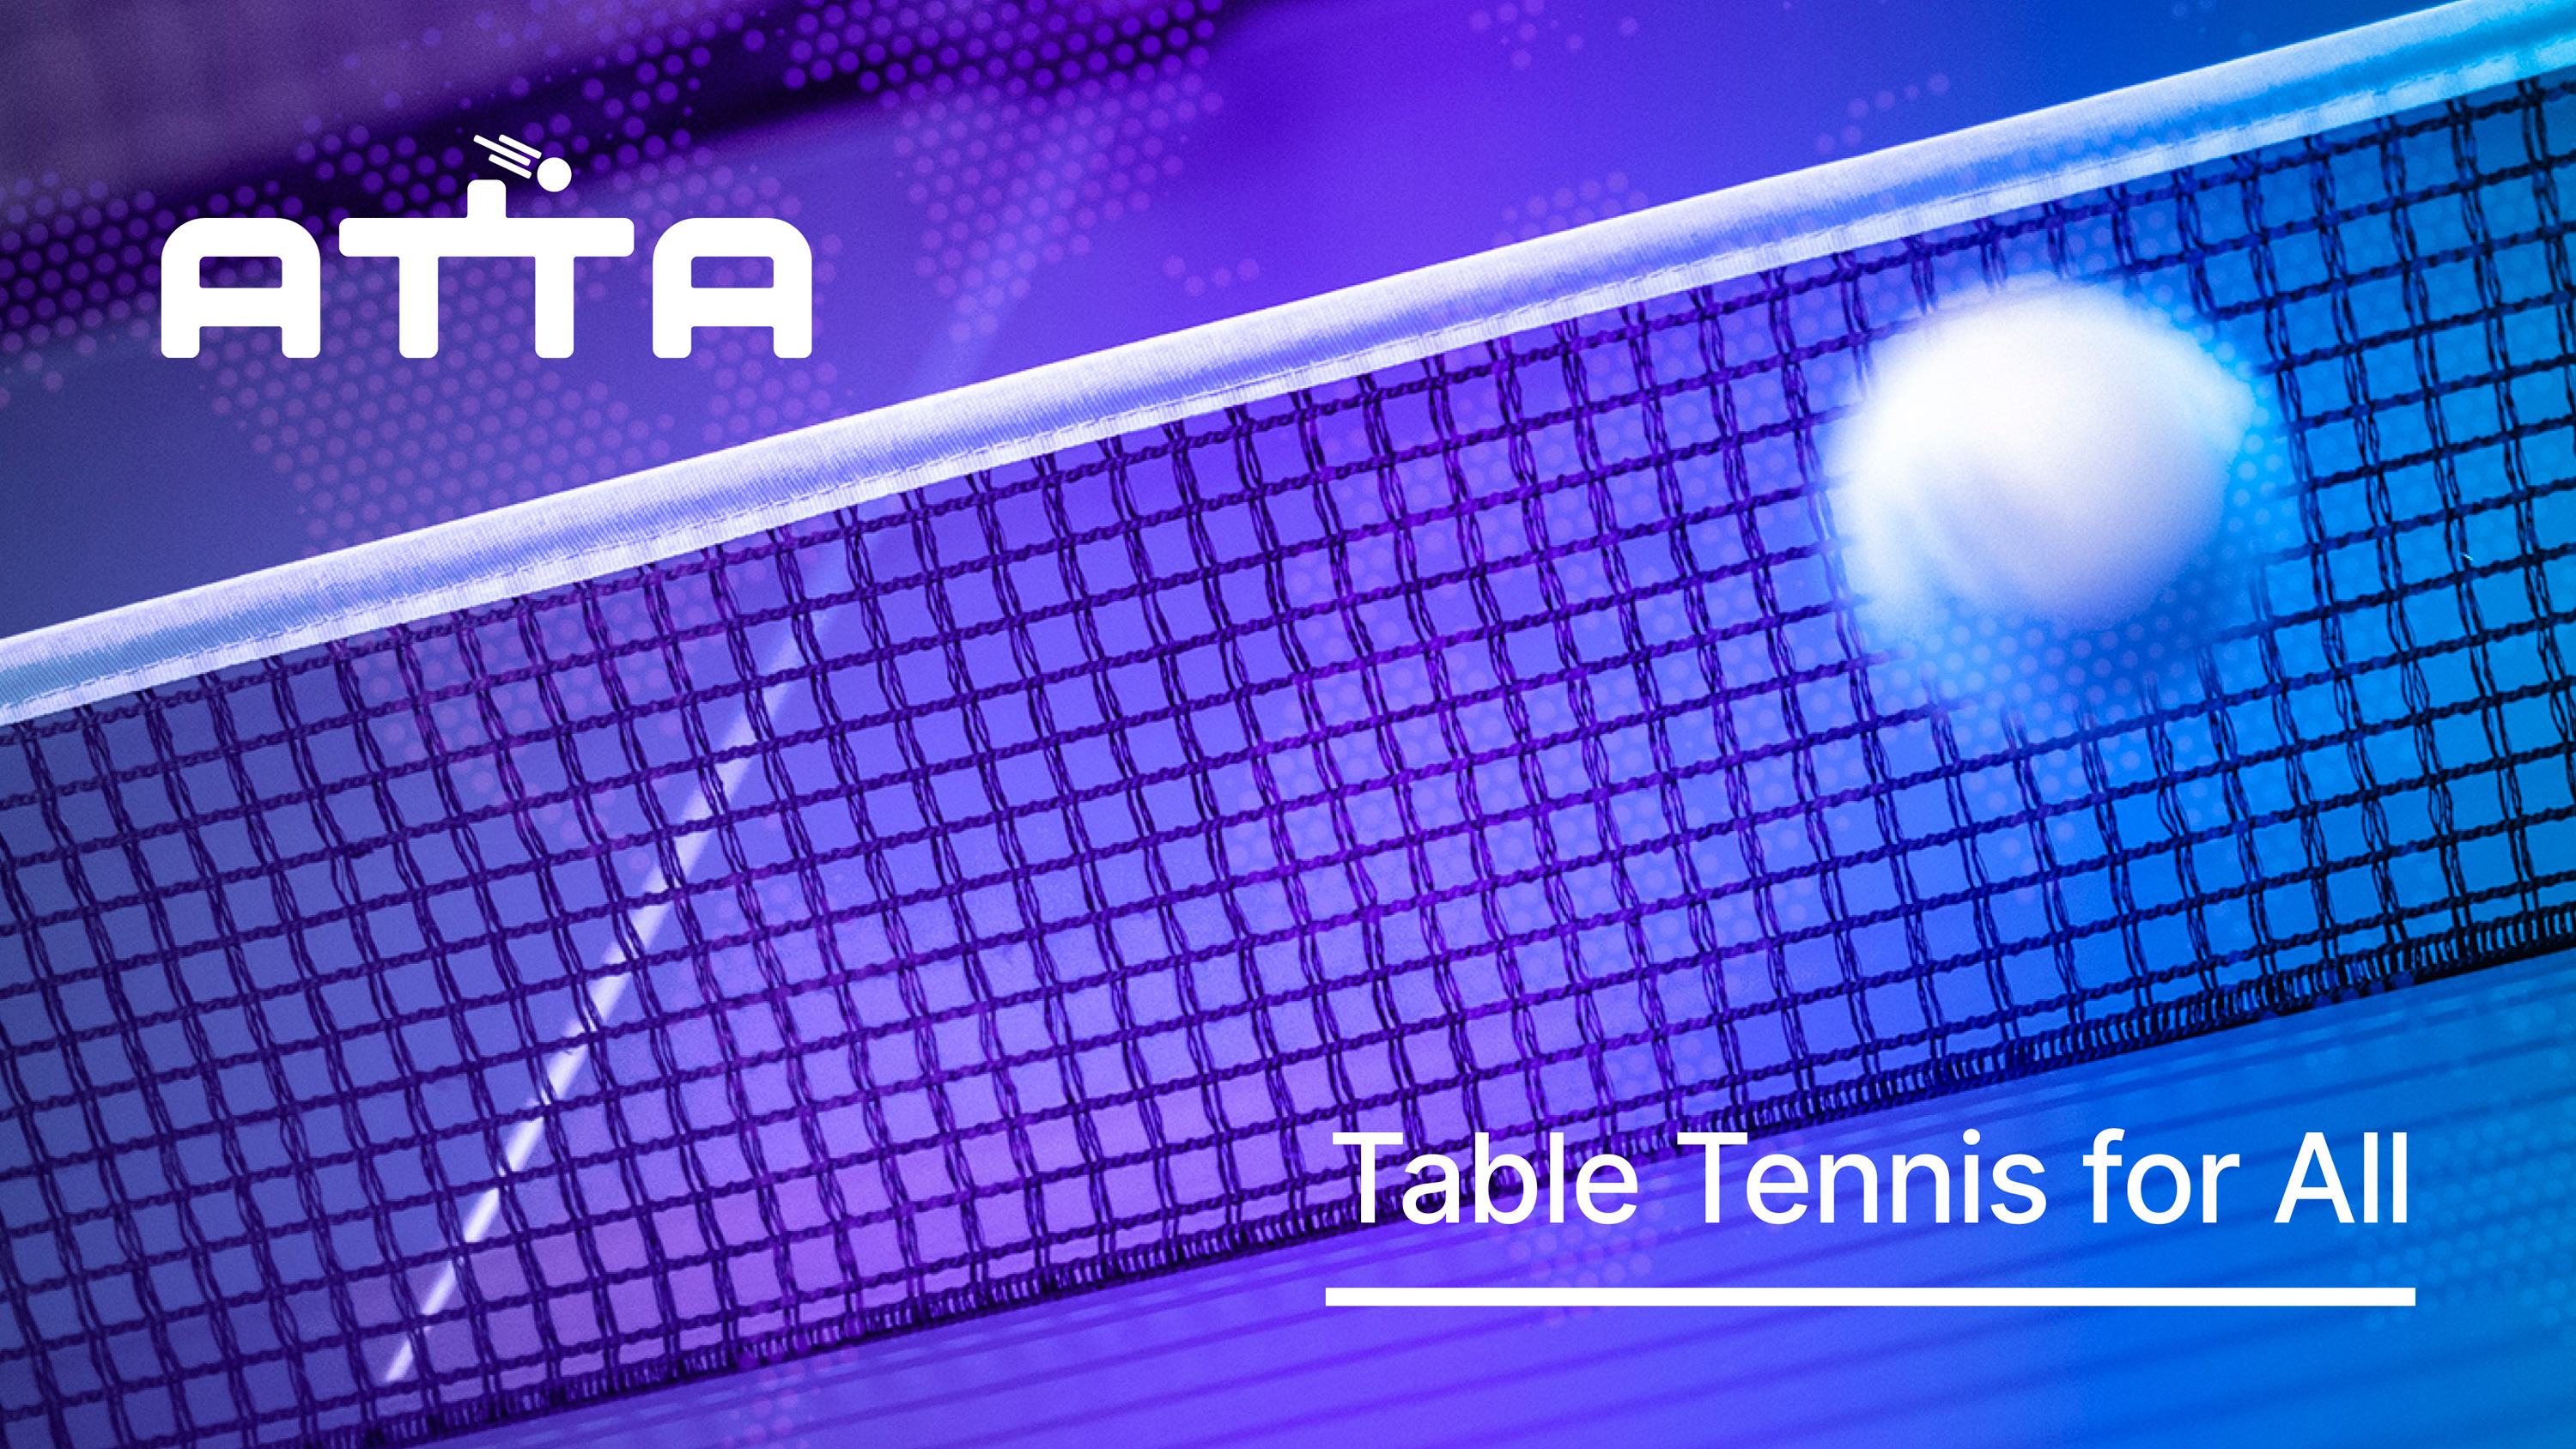 featured image:American Table Tennis Association Brand Identity & Website